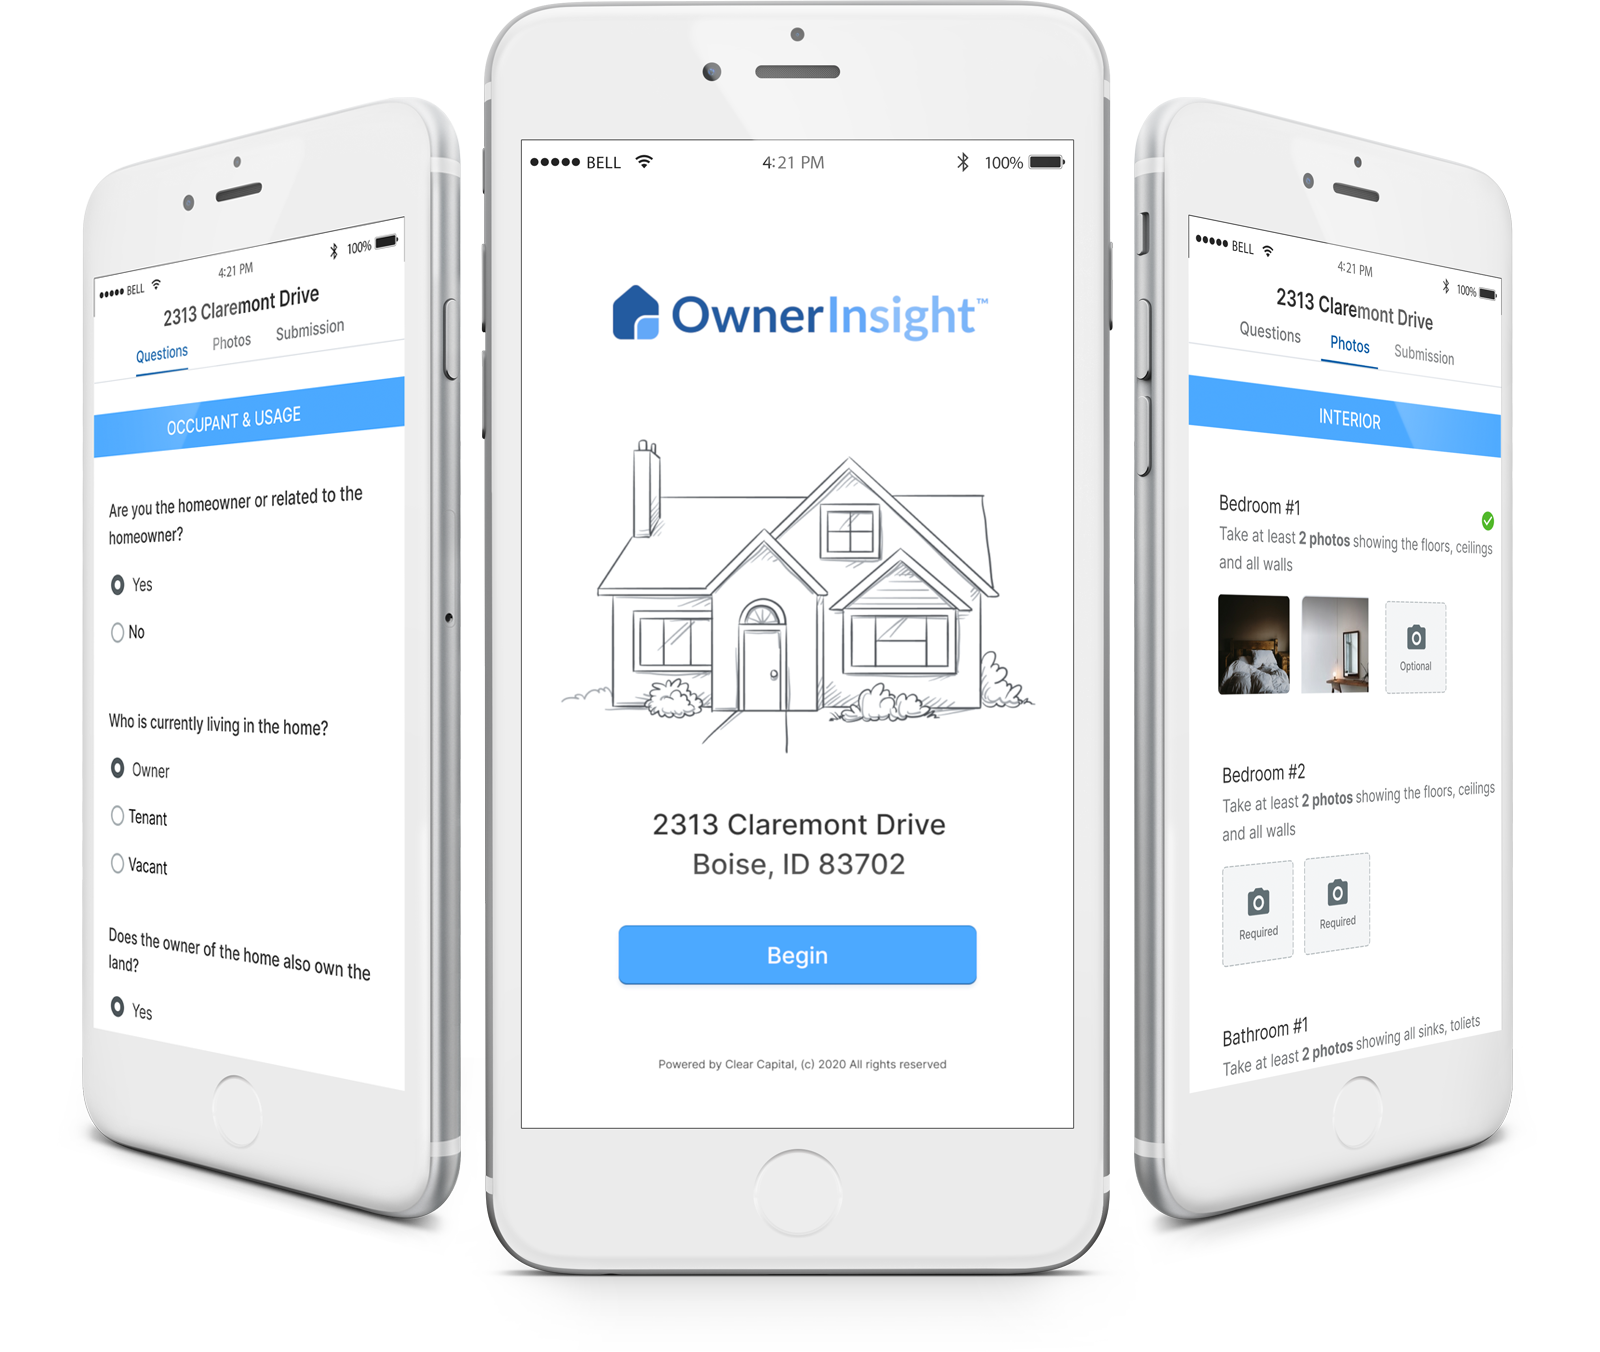 ownerinsight homeowner appraisal tool to help appraisers